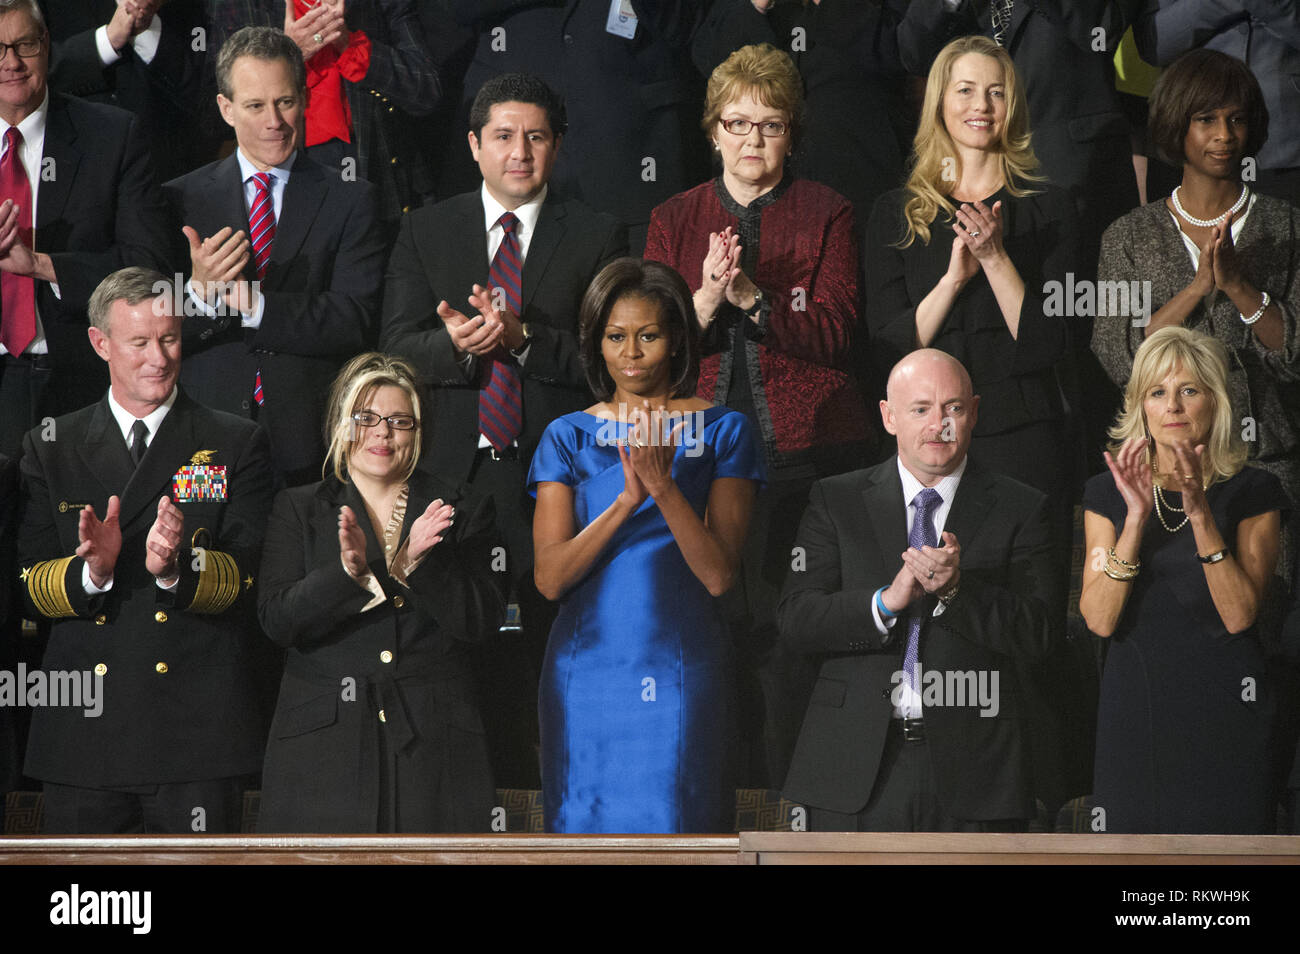 January 24, 2012 - Washington, District of Columbia, U.S. - First lady's  box guests applaud as United States President Barack Obama delivers his  State of the Union Address to a Joint Session